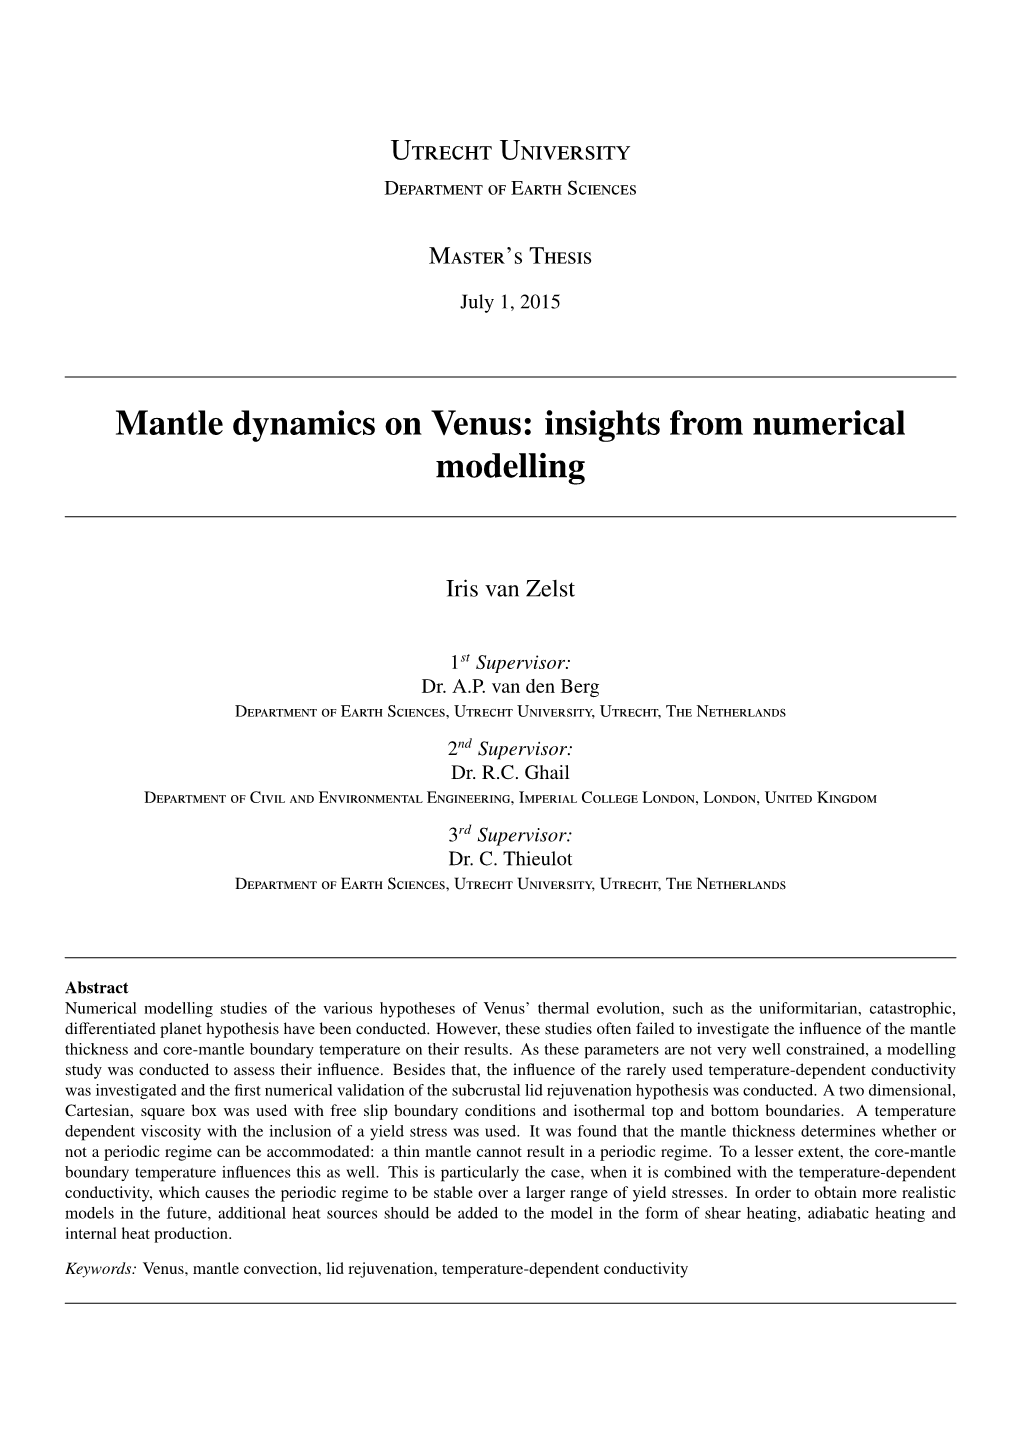 Mantle Dynamics on Venus: Insights from Numerical Modelling